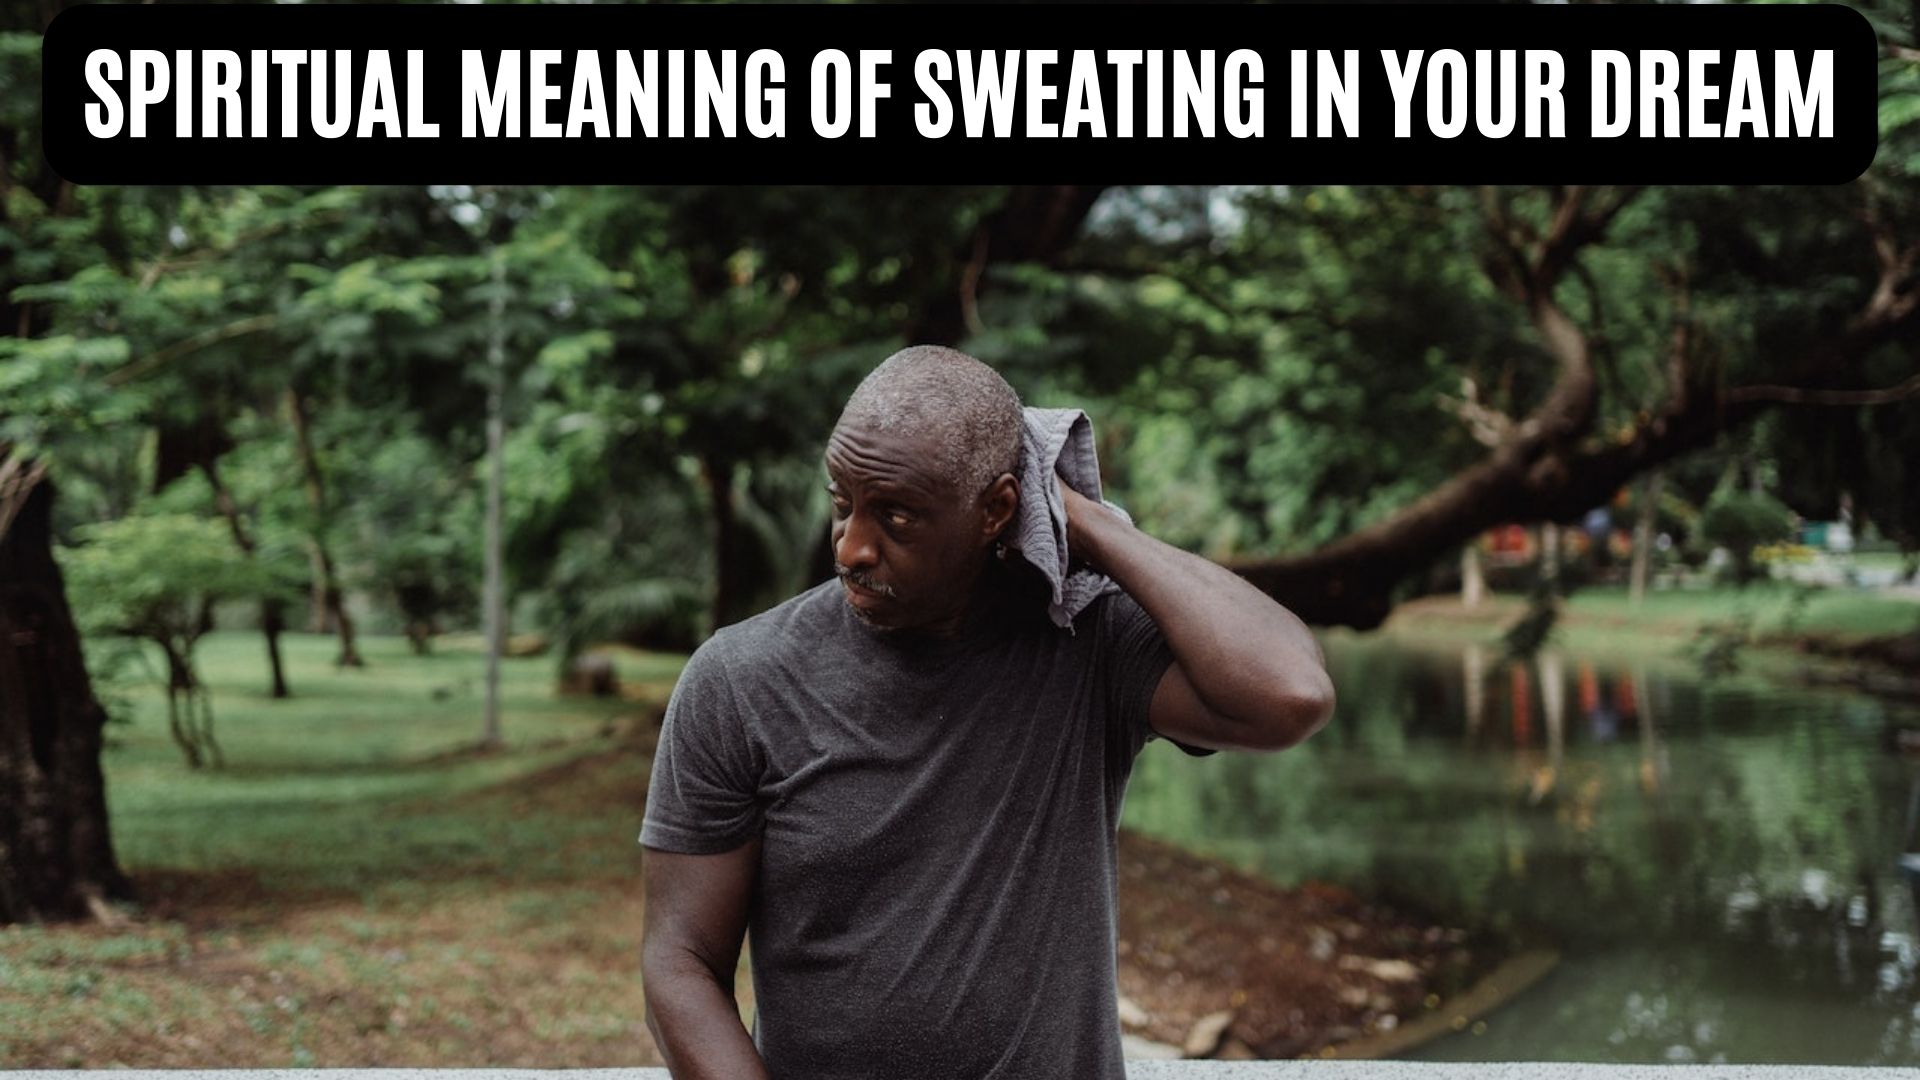 Spiritual Meaning Of Sweating In Your Dream - Symbolizes Your Fear And Nervousness